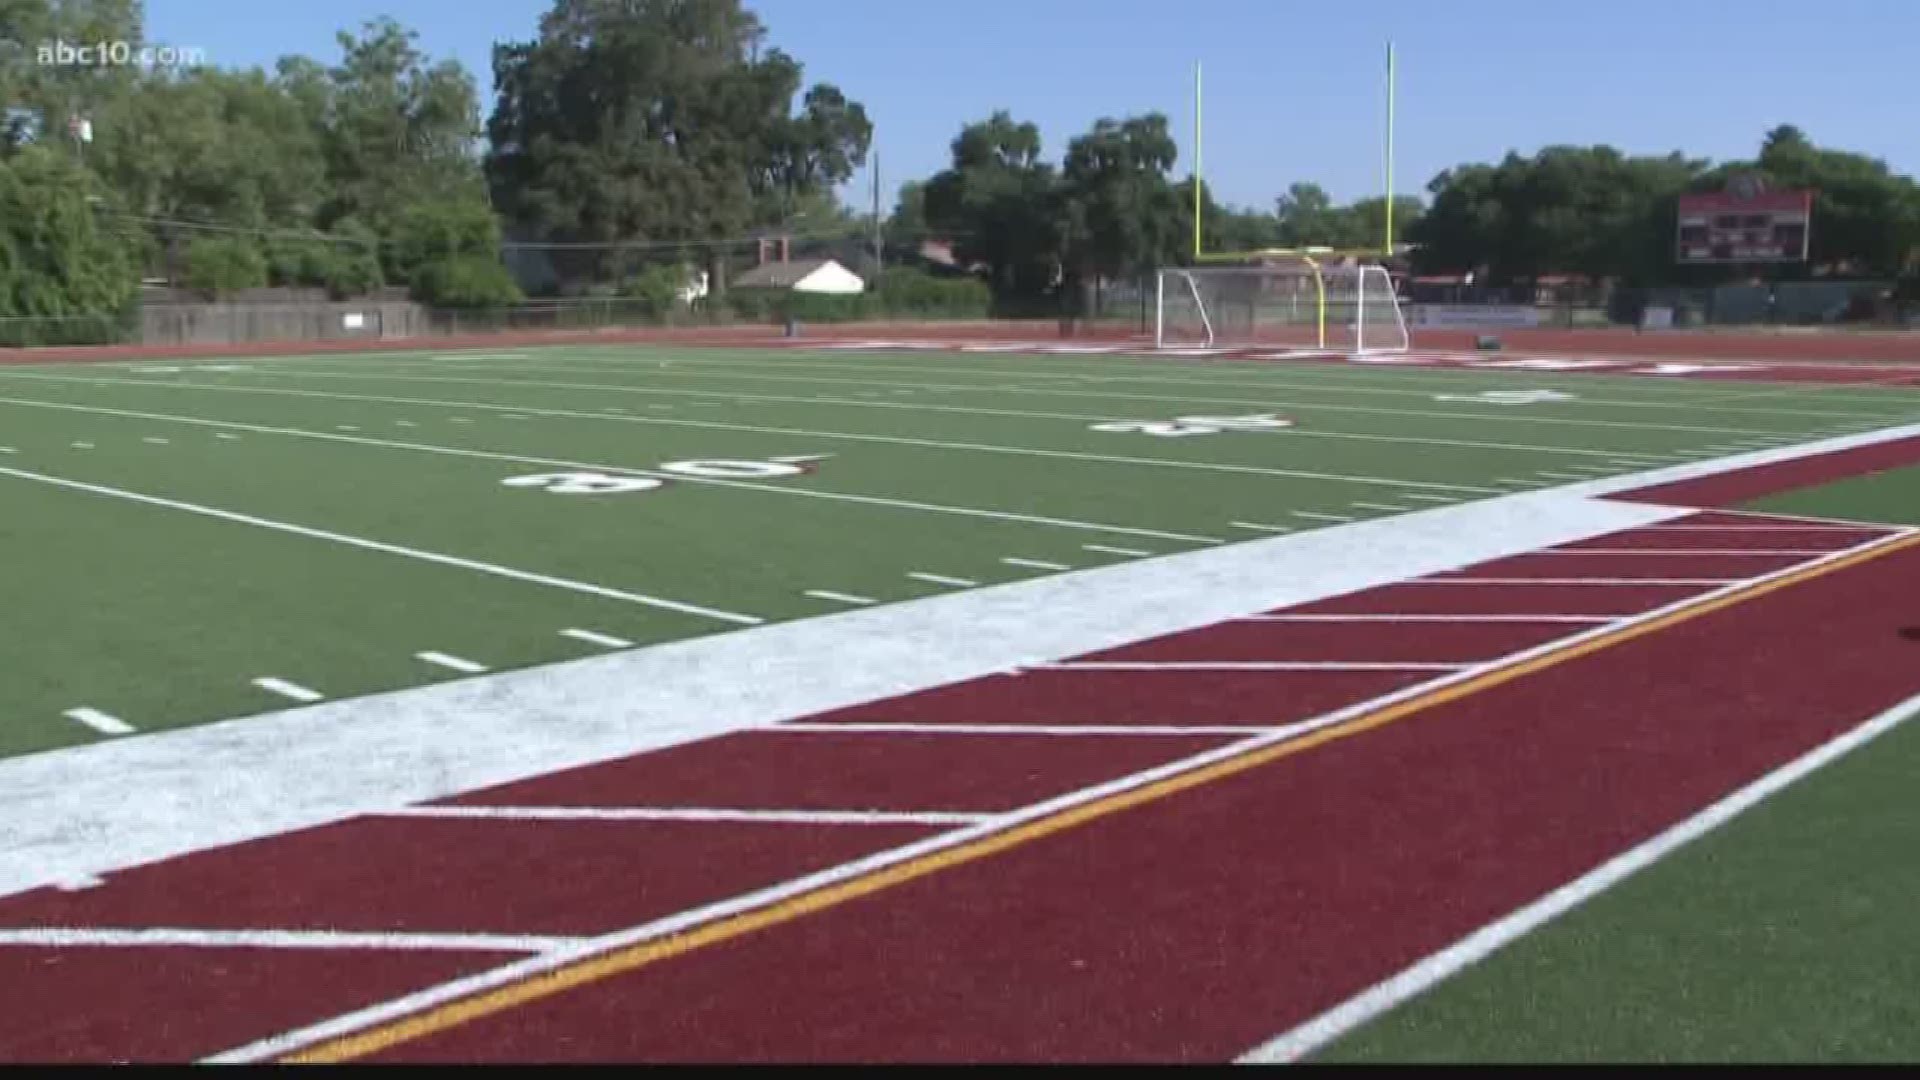 Two of Sacramento's oldest high schools recently got some good news. McClatchy saw completion of a new multi-use football field last fall, which made Hiram Johnson High wonder why they weren't next in line.